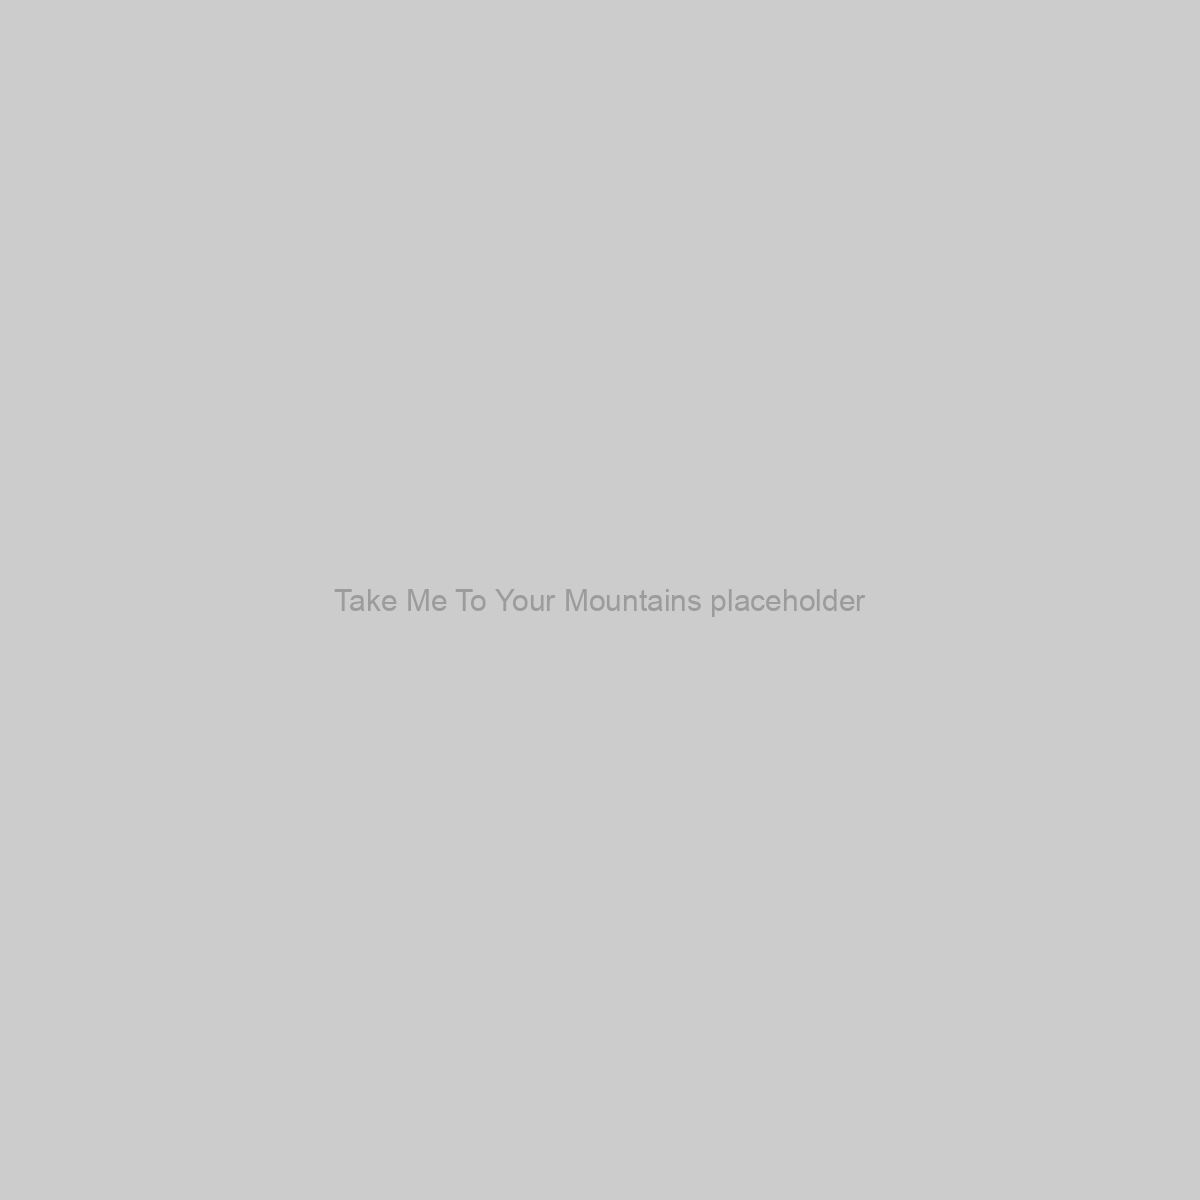 Take Me To Your Mountains Placeholder Image